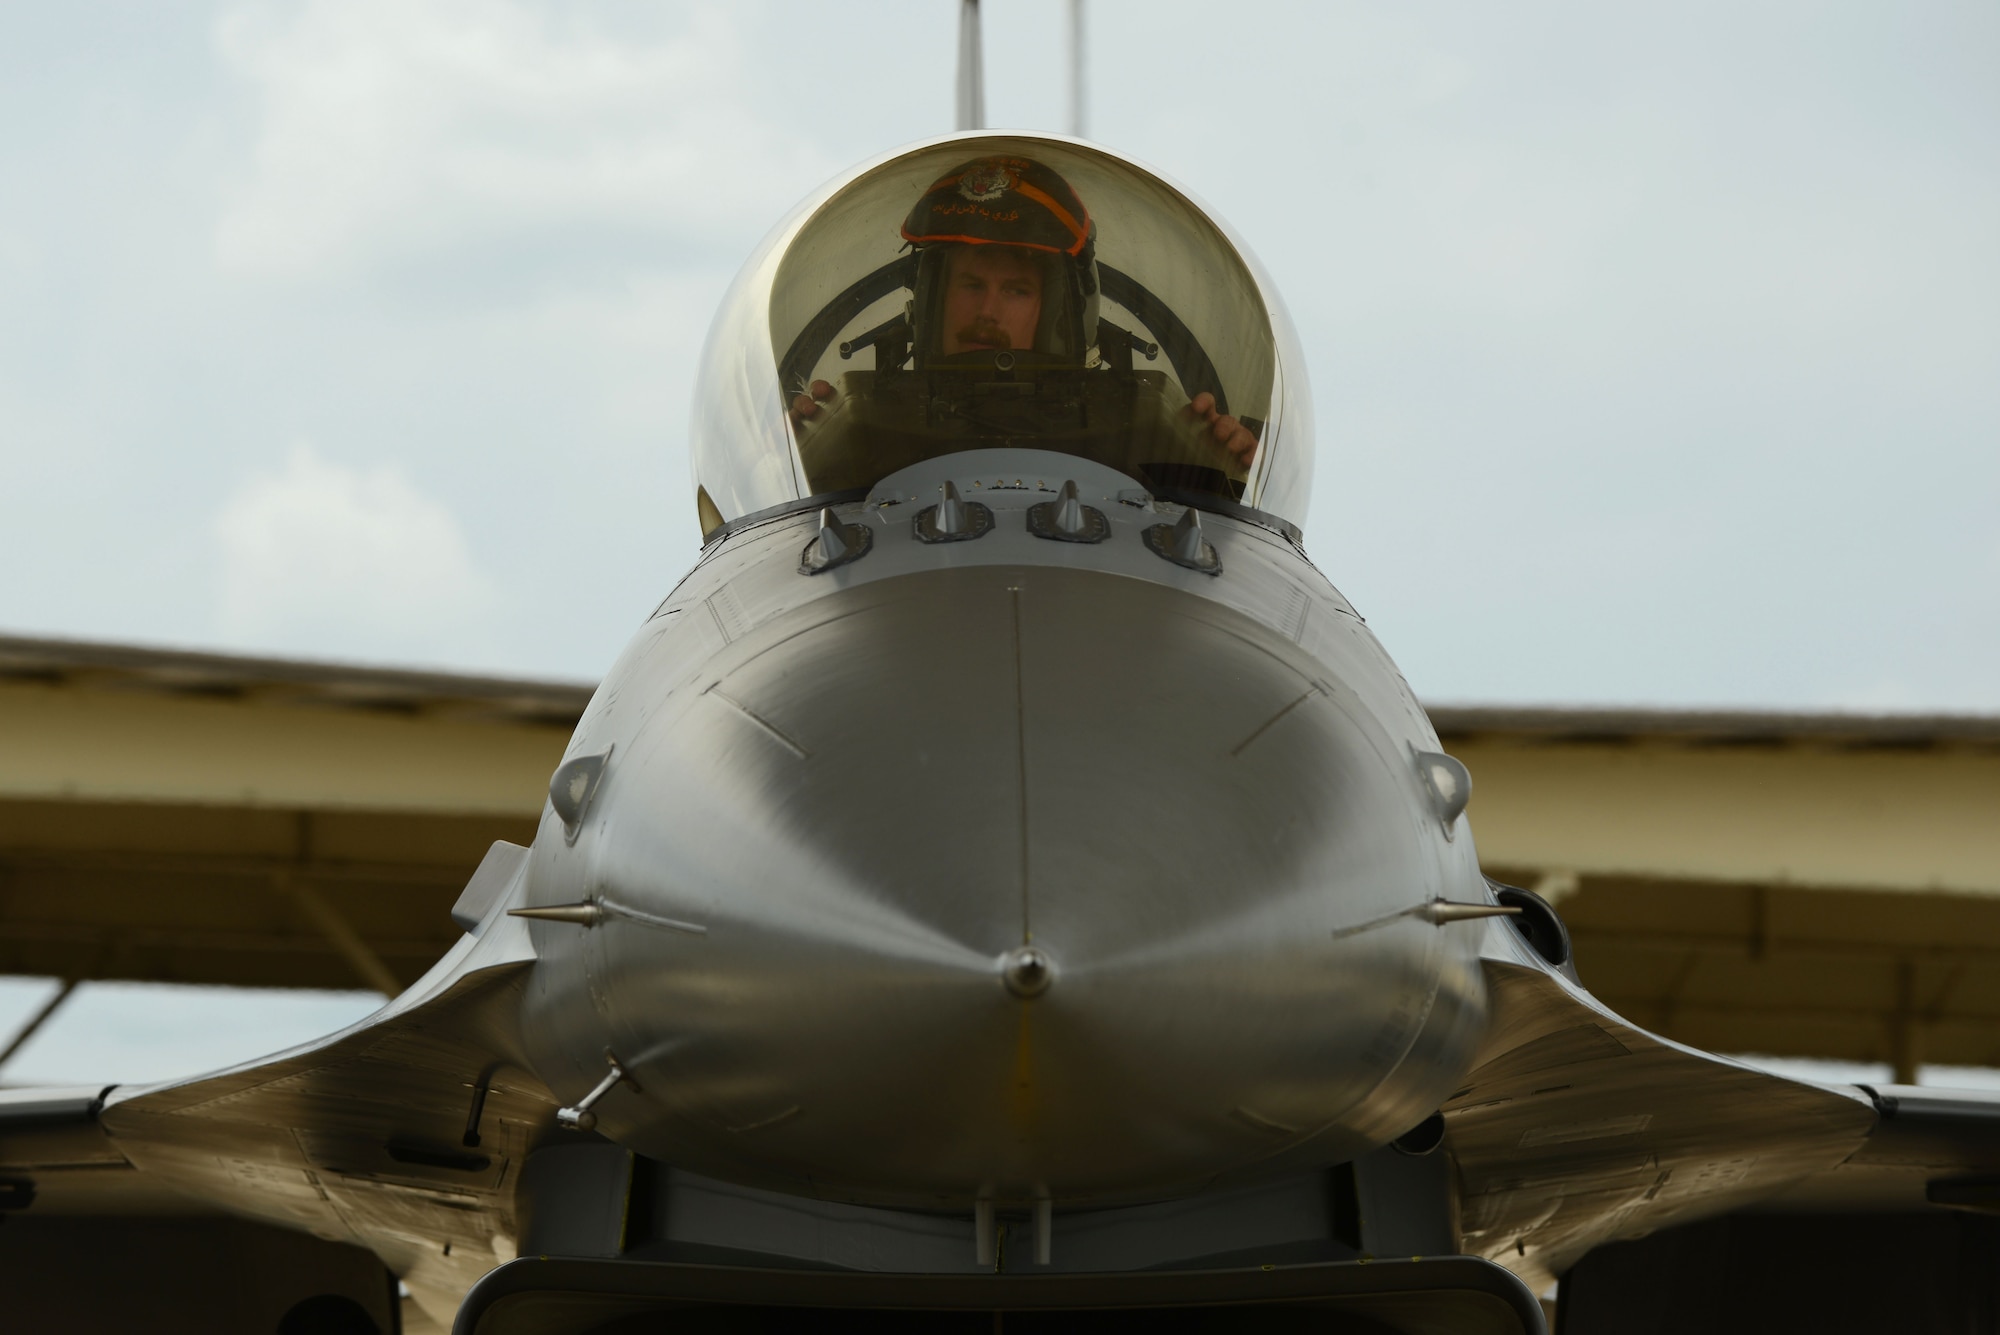 Lt. Col. Craig Andrle, 79th Fighter Squadron commander, taxis a F-16 Fighting Falcon on the Shaw Air Force Base, S.C., flightline after returning from a deployment May 4, 2017. Andrle’s unit recently returned from Bagram Air Base, Afghanistan where they provided close air support to U.S. Special Operations and Afghan National Army commandos in Afghanistan’s Nangahar province. (U.S. Air Force photo by Airman 1st Class Kathryn R.C. Reaves)